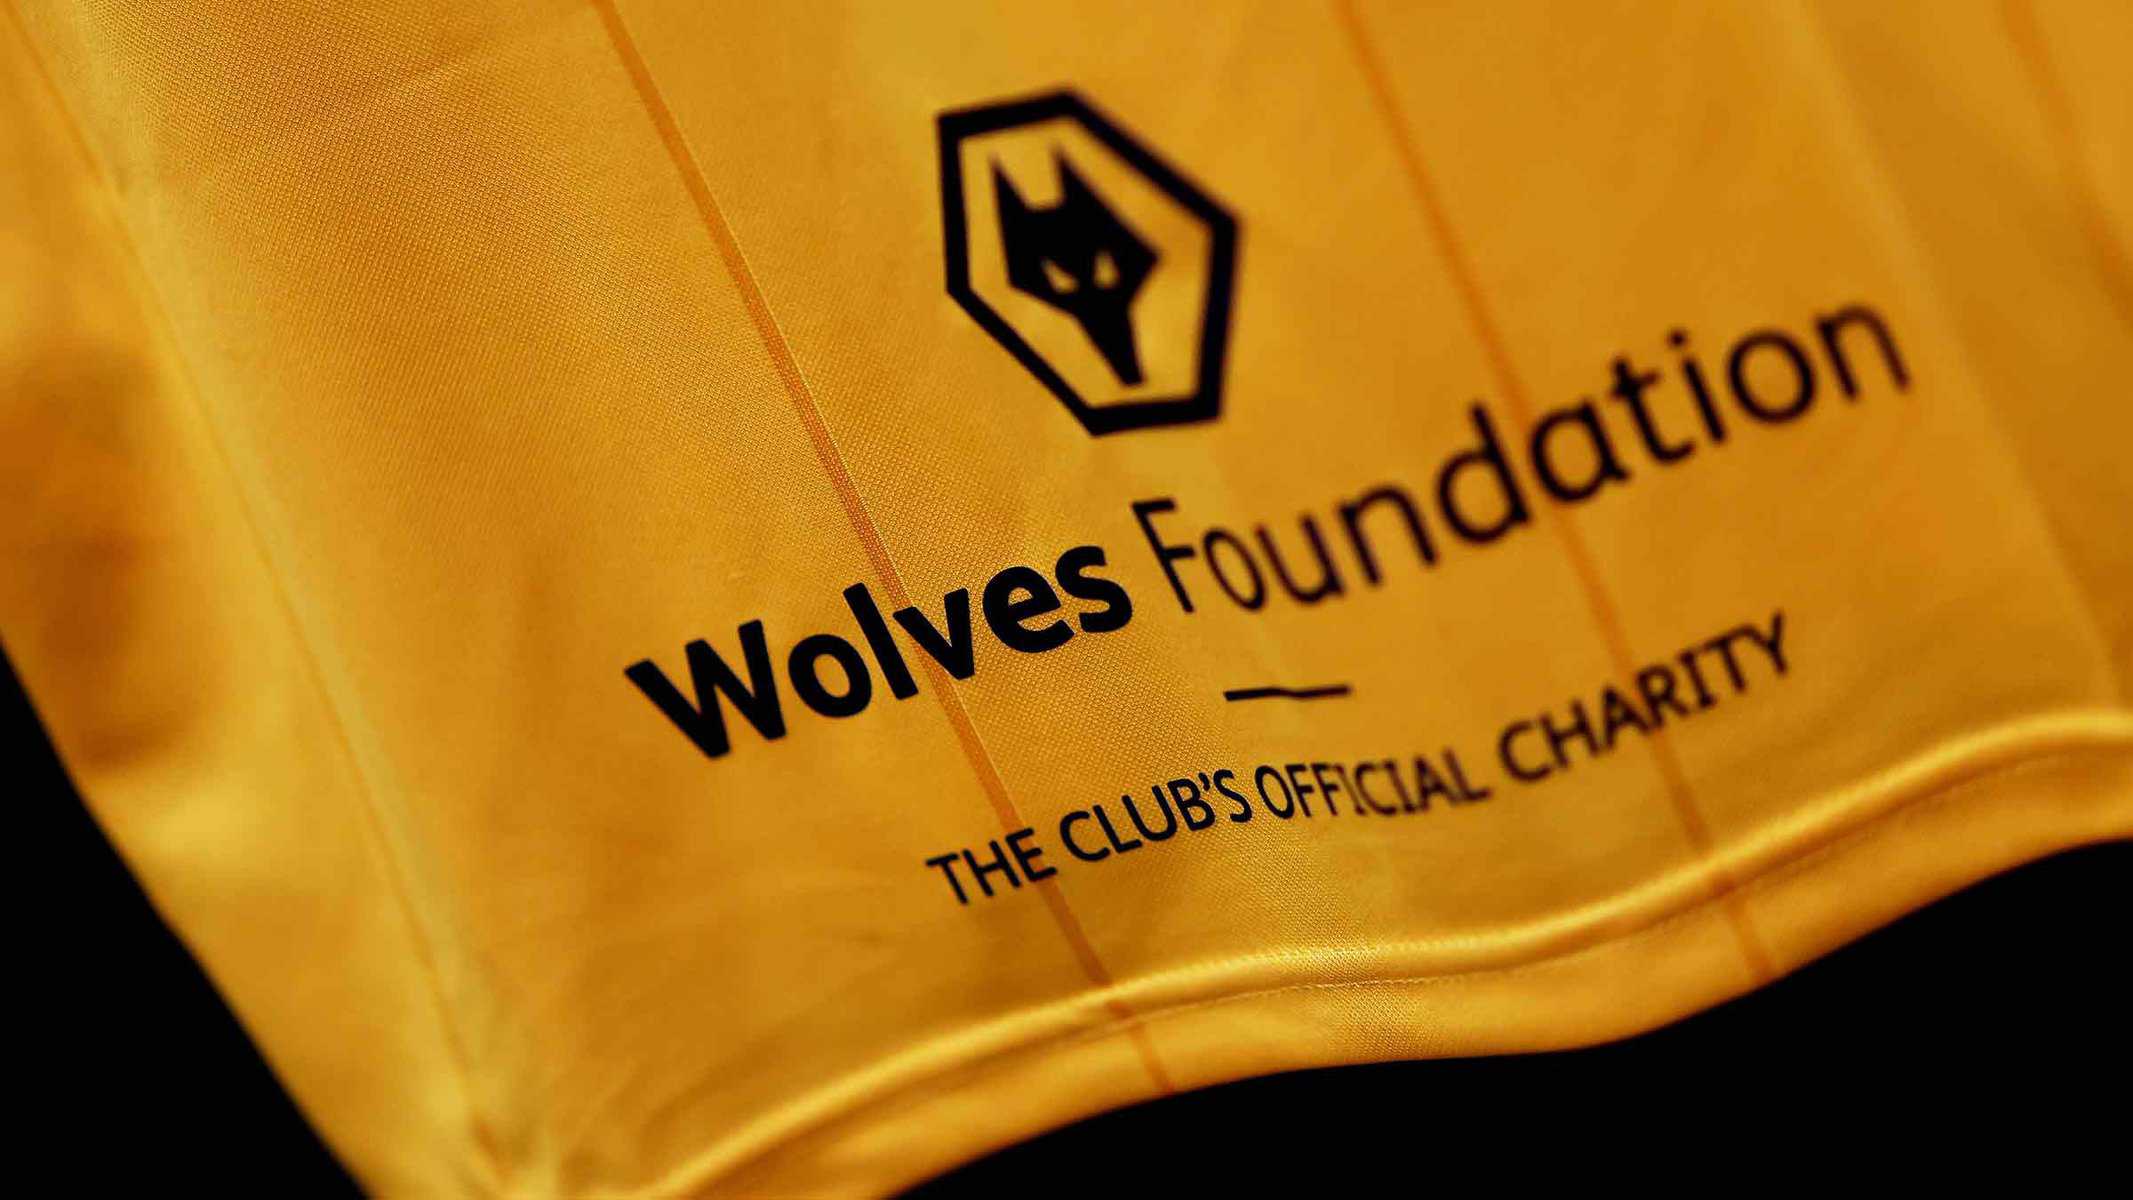 Friendly matchworn shirts to support Wolves Foundation Image